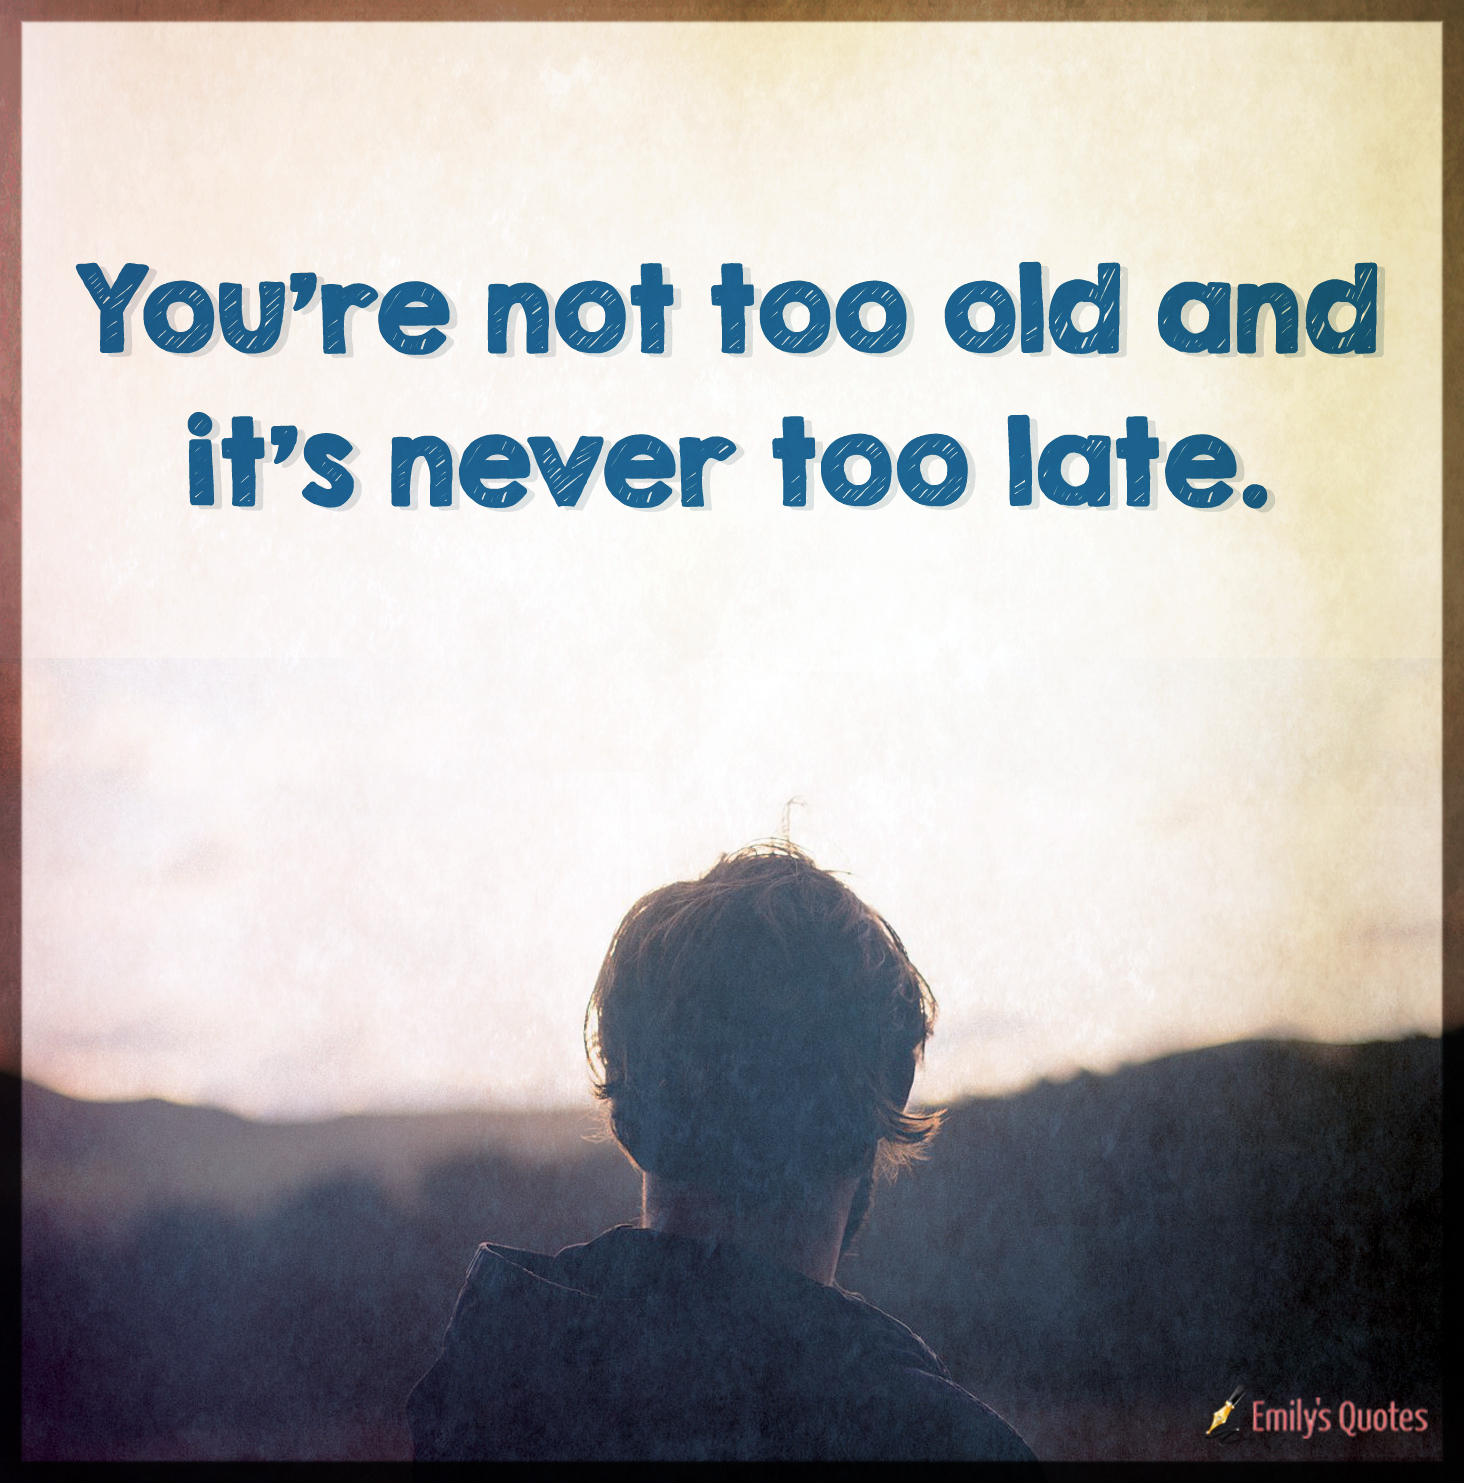 You’re not too old and it’s never too late | Popular inspirational